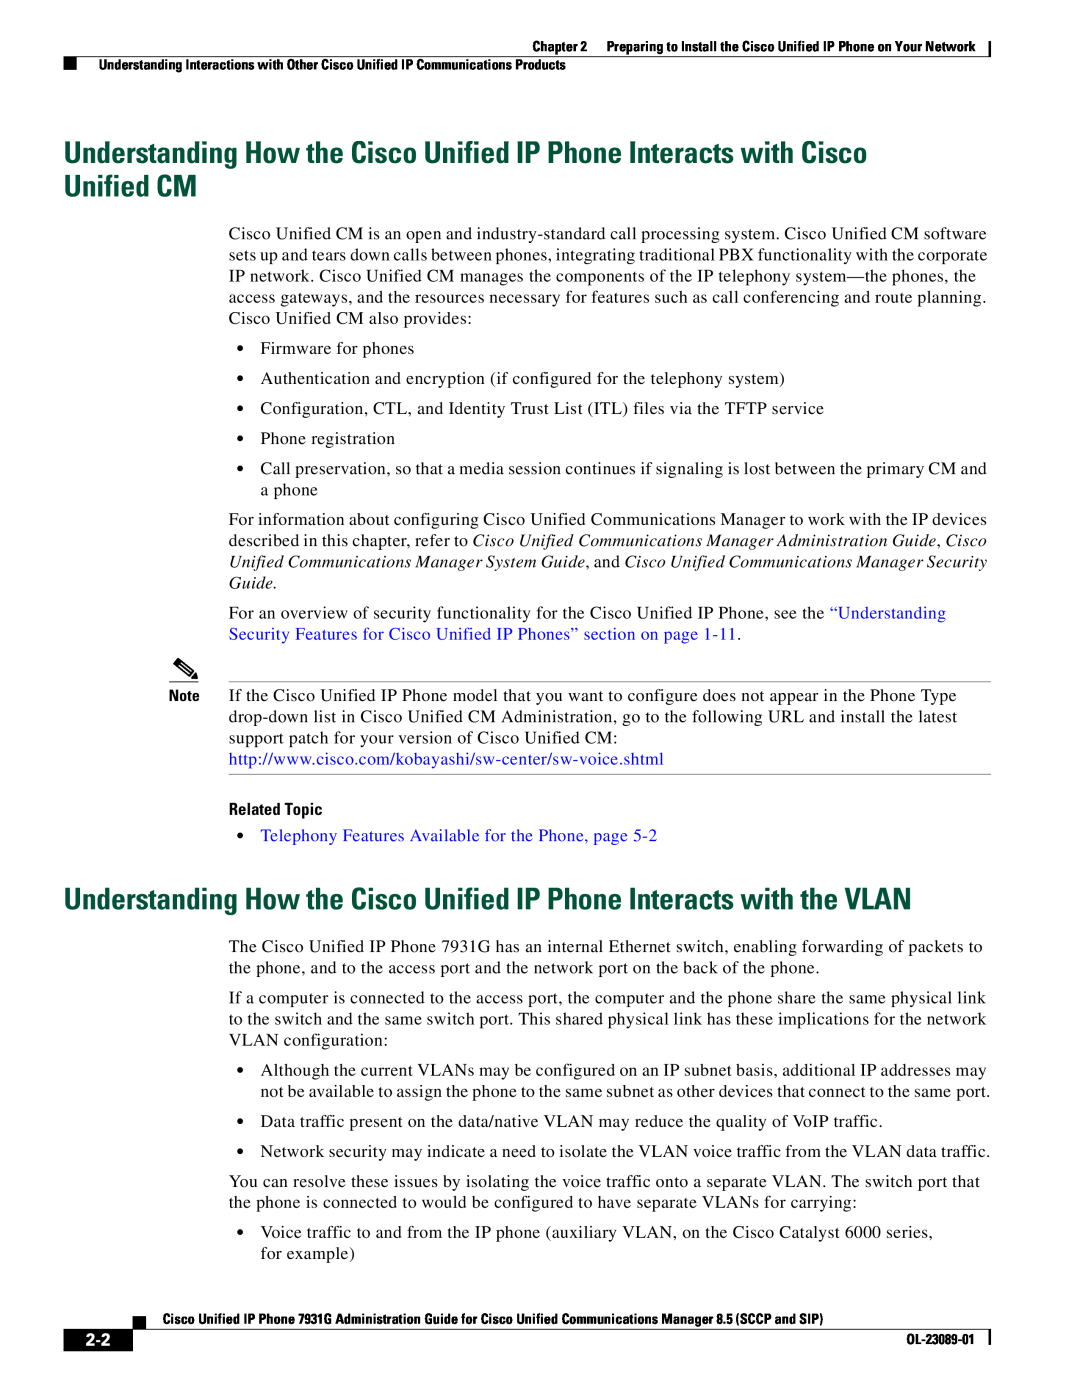 Cisco Systems OL-23089-01 manual Understanding How the Cisco Unified IP Phone Interacts with the VLAN, Related Topic 